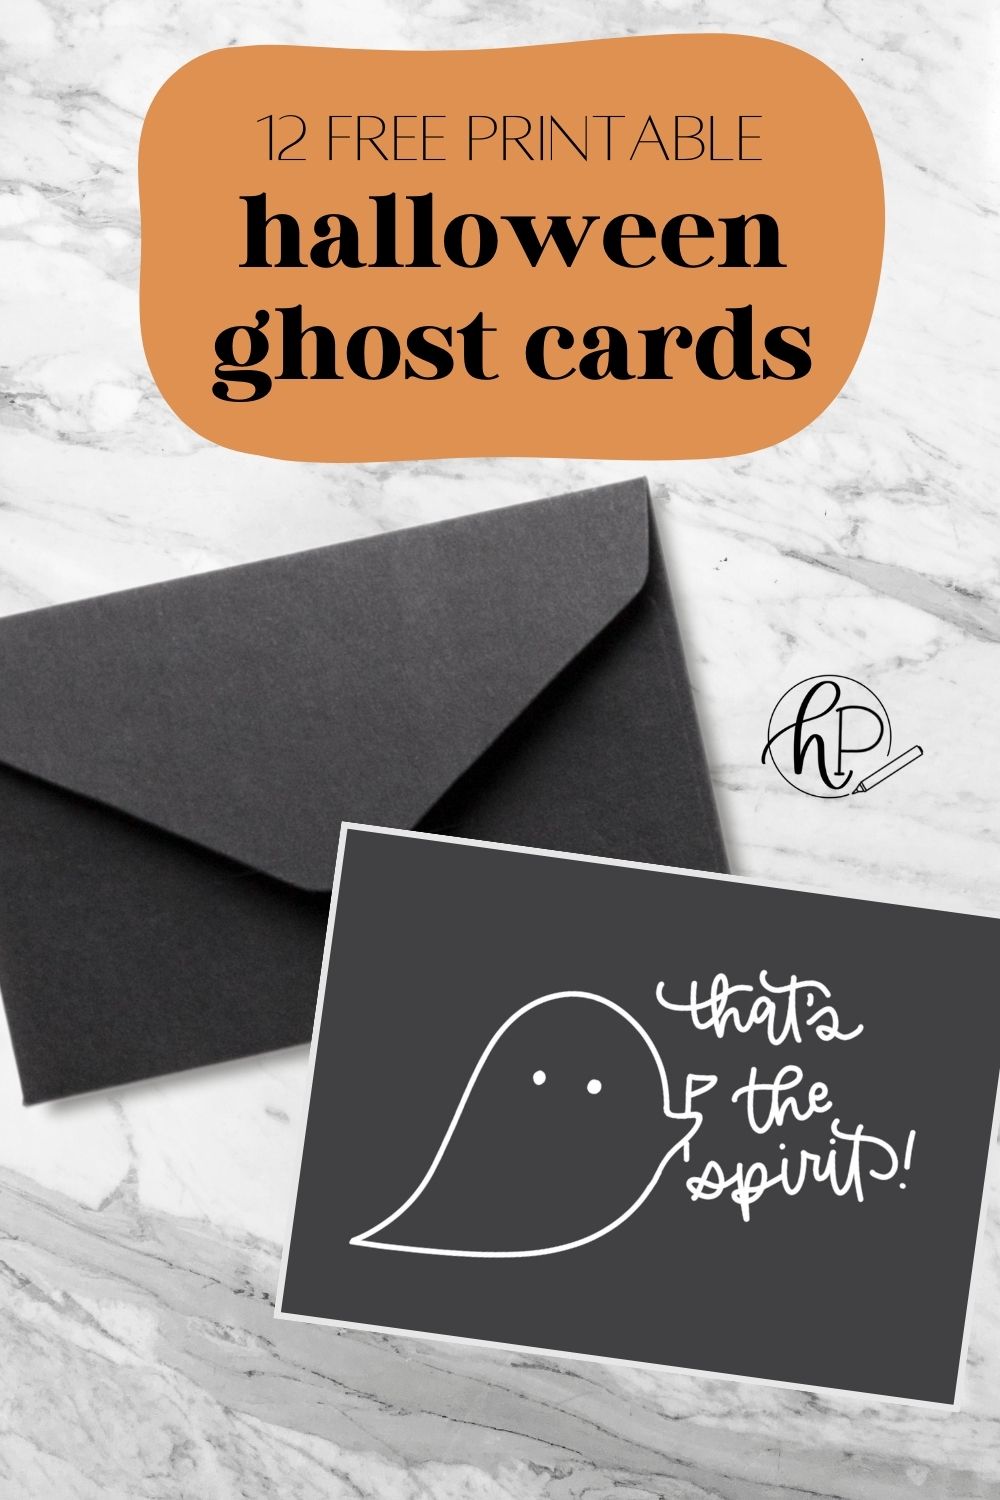 Free printable halloween ghost cards, one of the 12 designs is shown printed with a black envelope. card features line art ghost holding flag and hand lettering that says 'that's the spirit'.